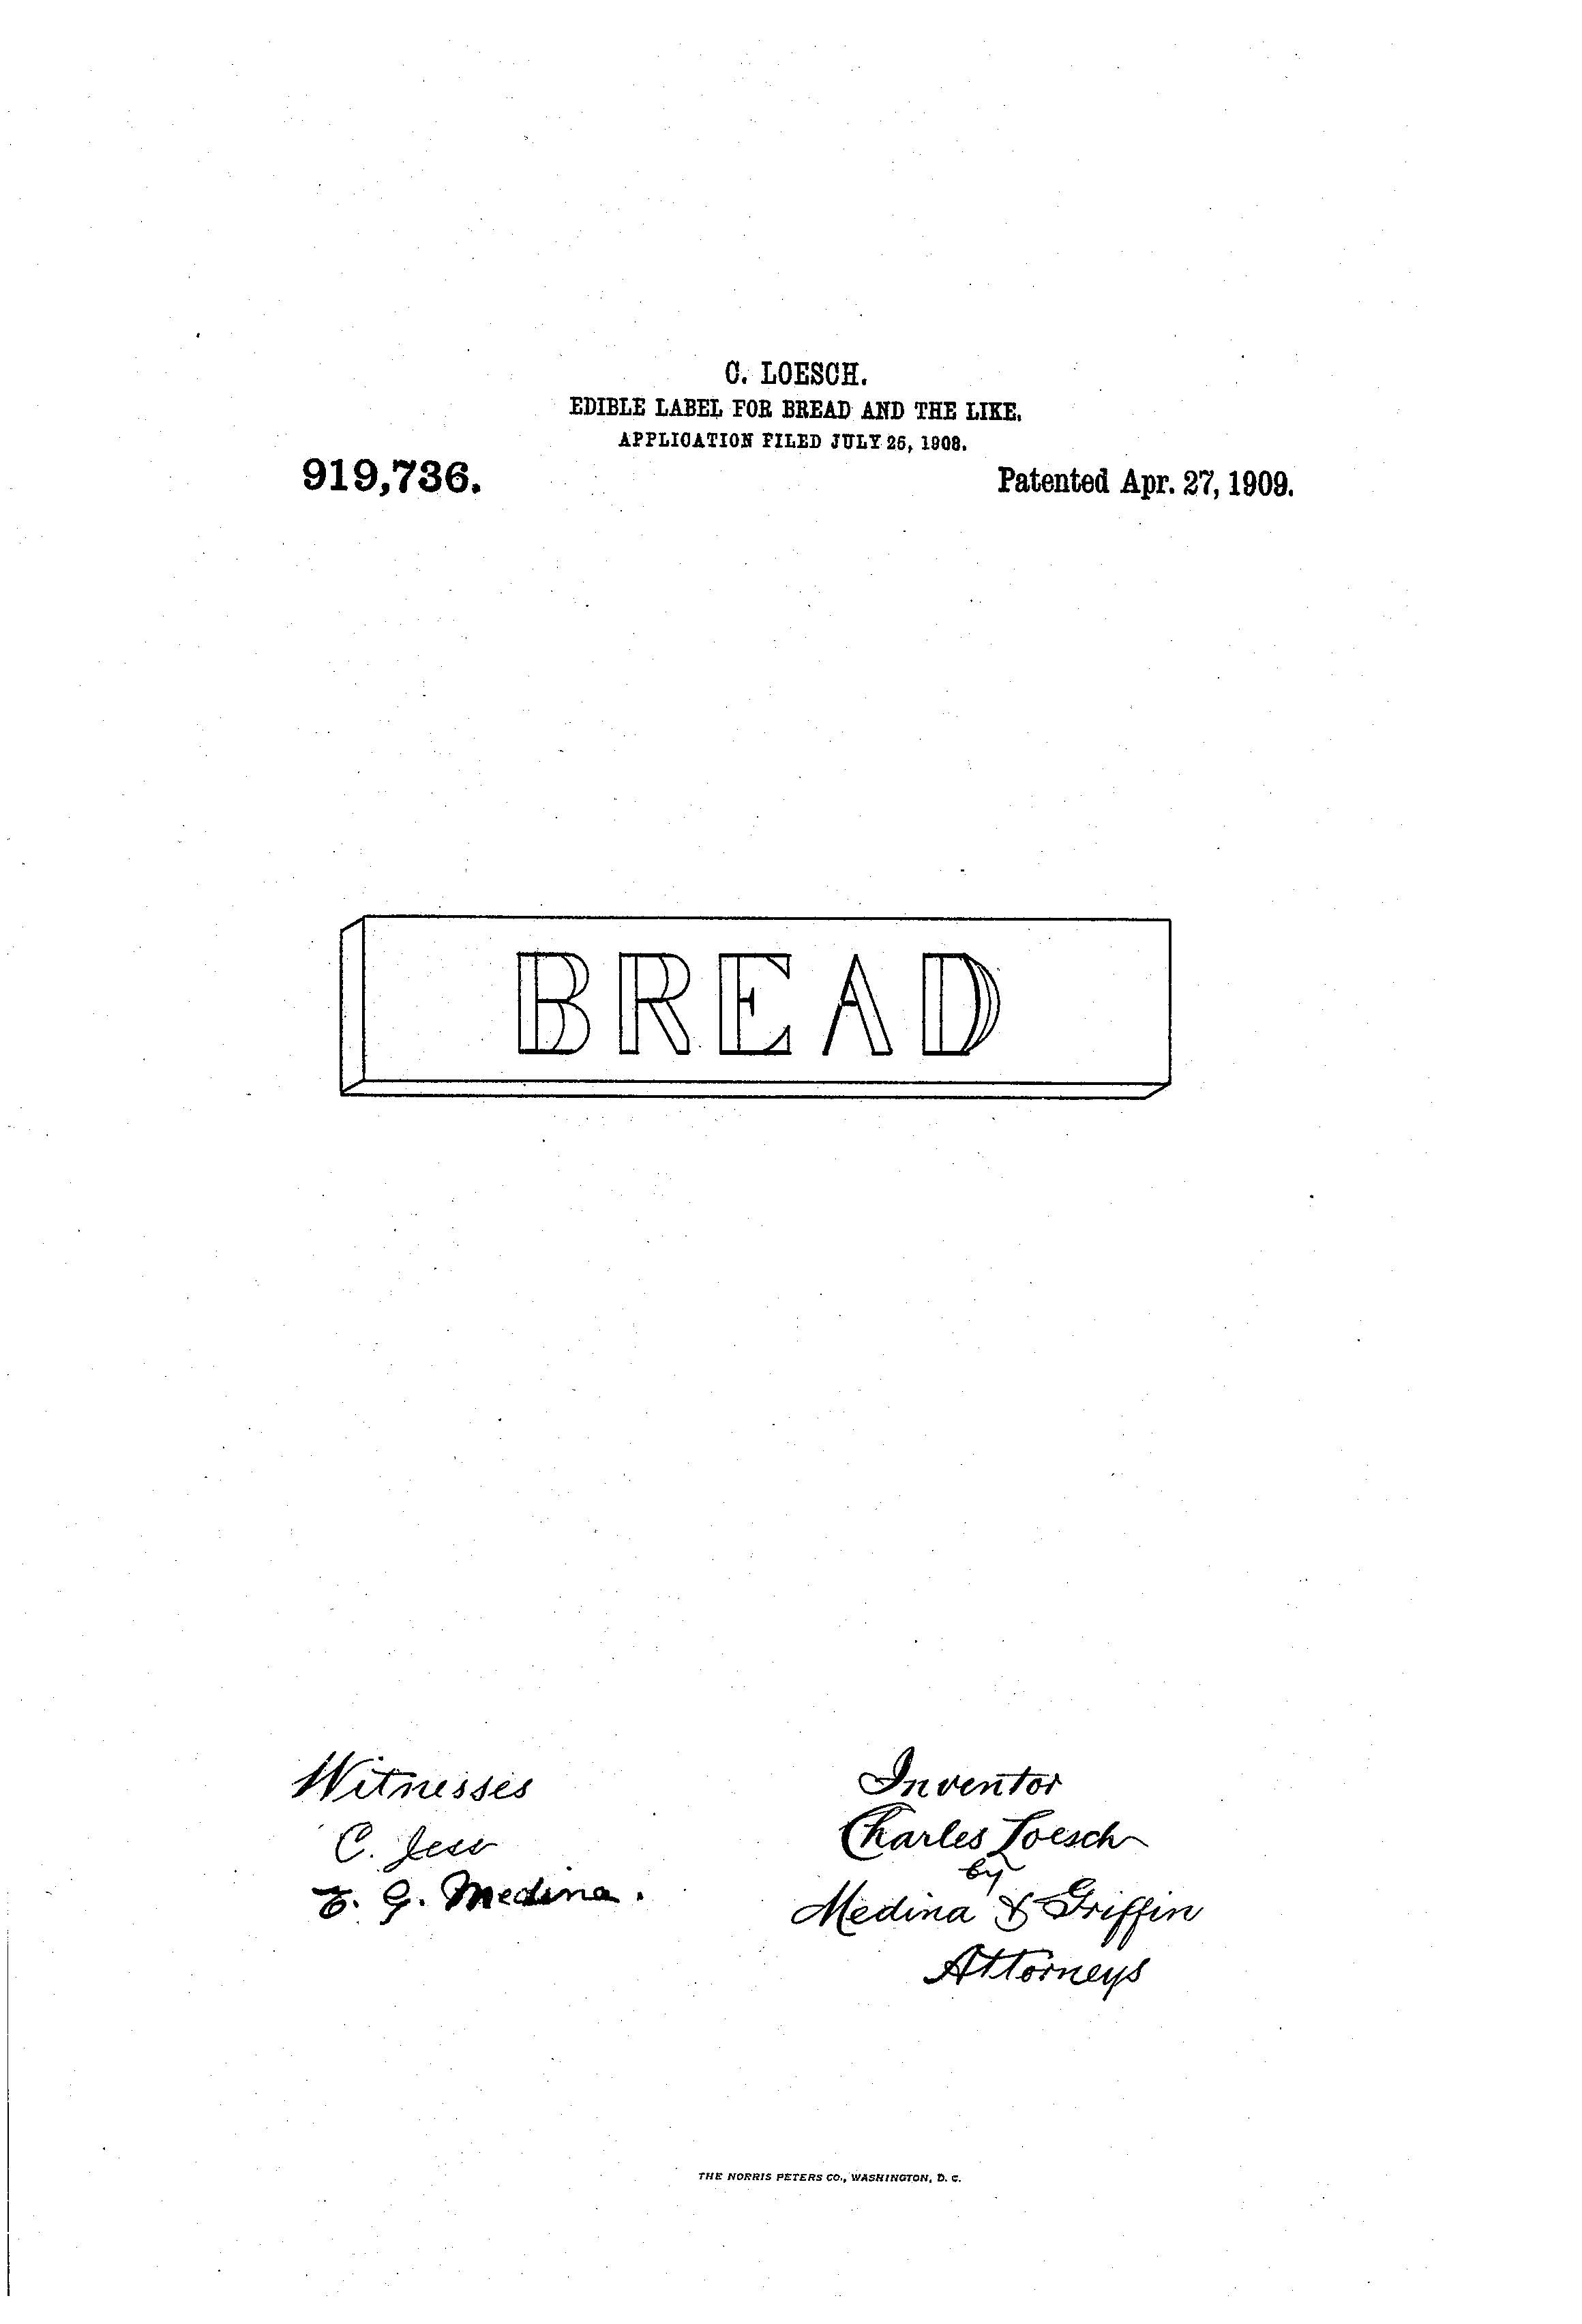 Patent-Illustration-Edible-Label-For-Bread_and-the-Like_Page_1